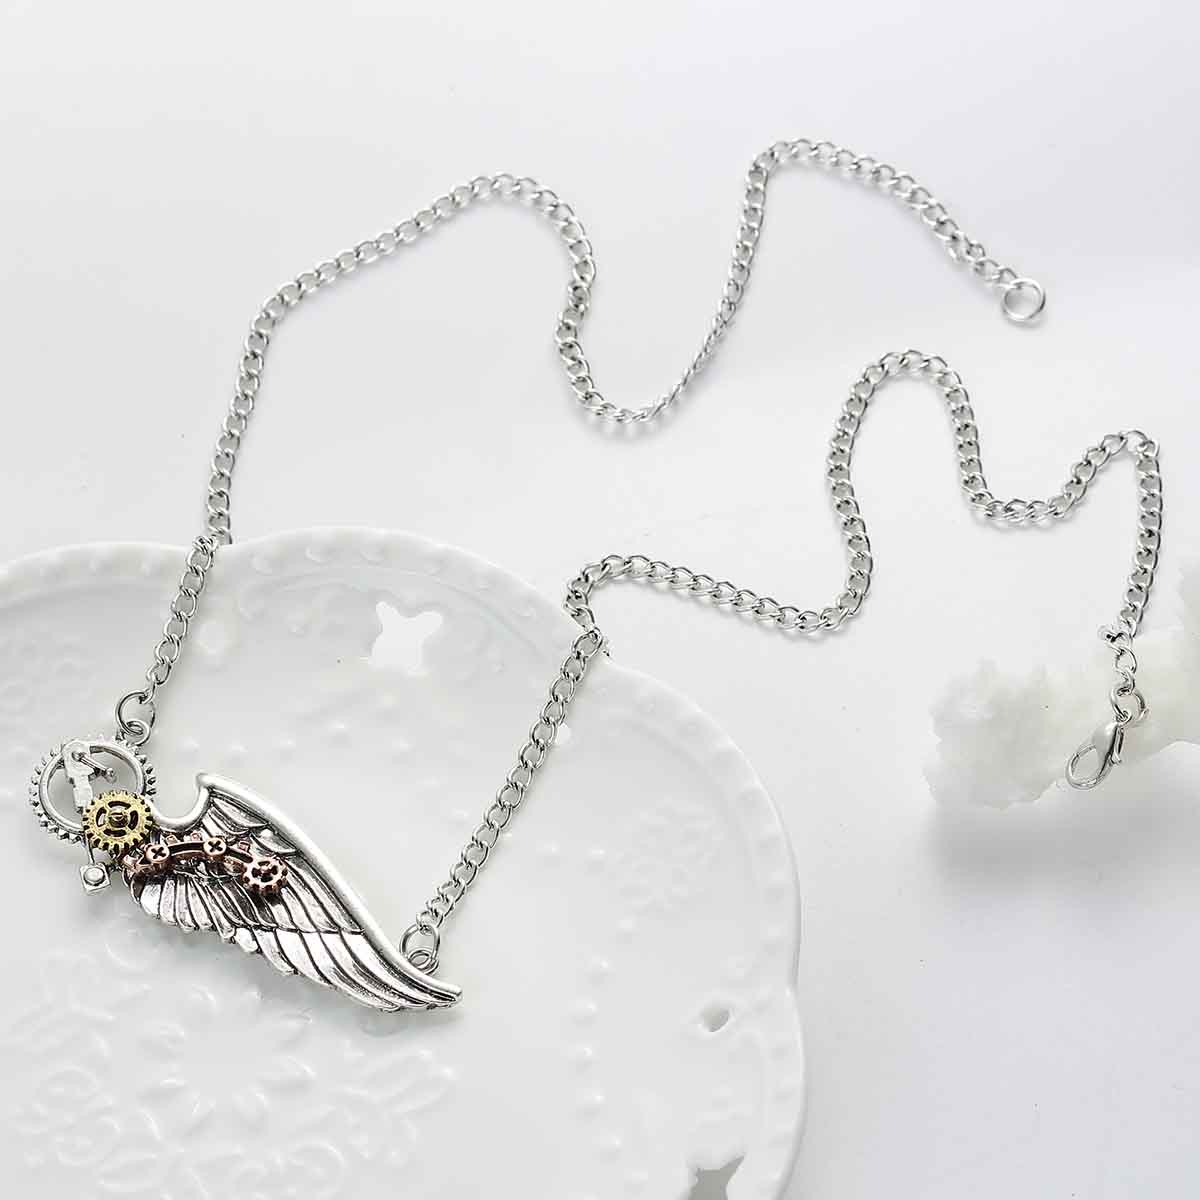 Picture of New Fashion Steampunk Necklace Link Curb Chain Antique Silver Wing Gear Connector 63.2cm(24 7/8") long, 1 Piece